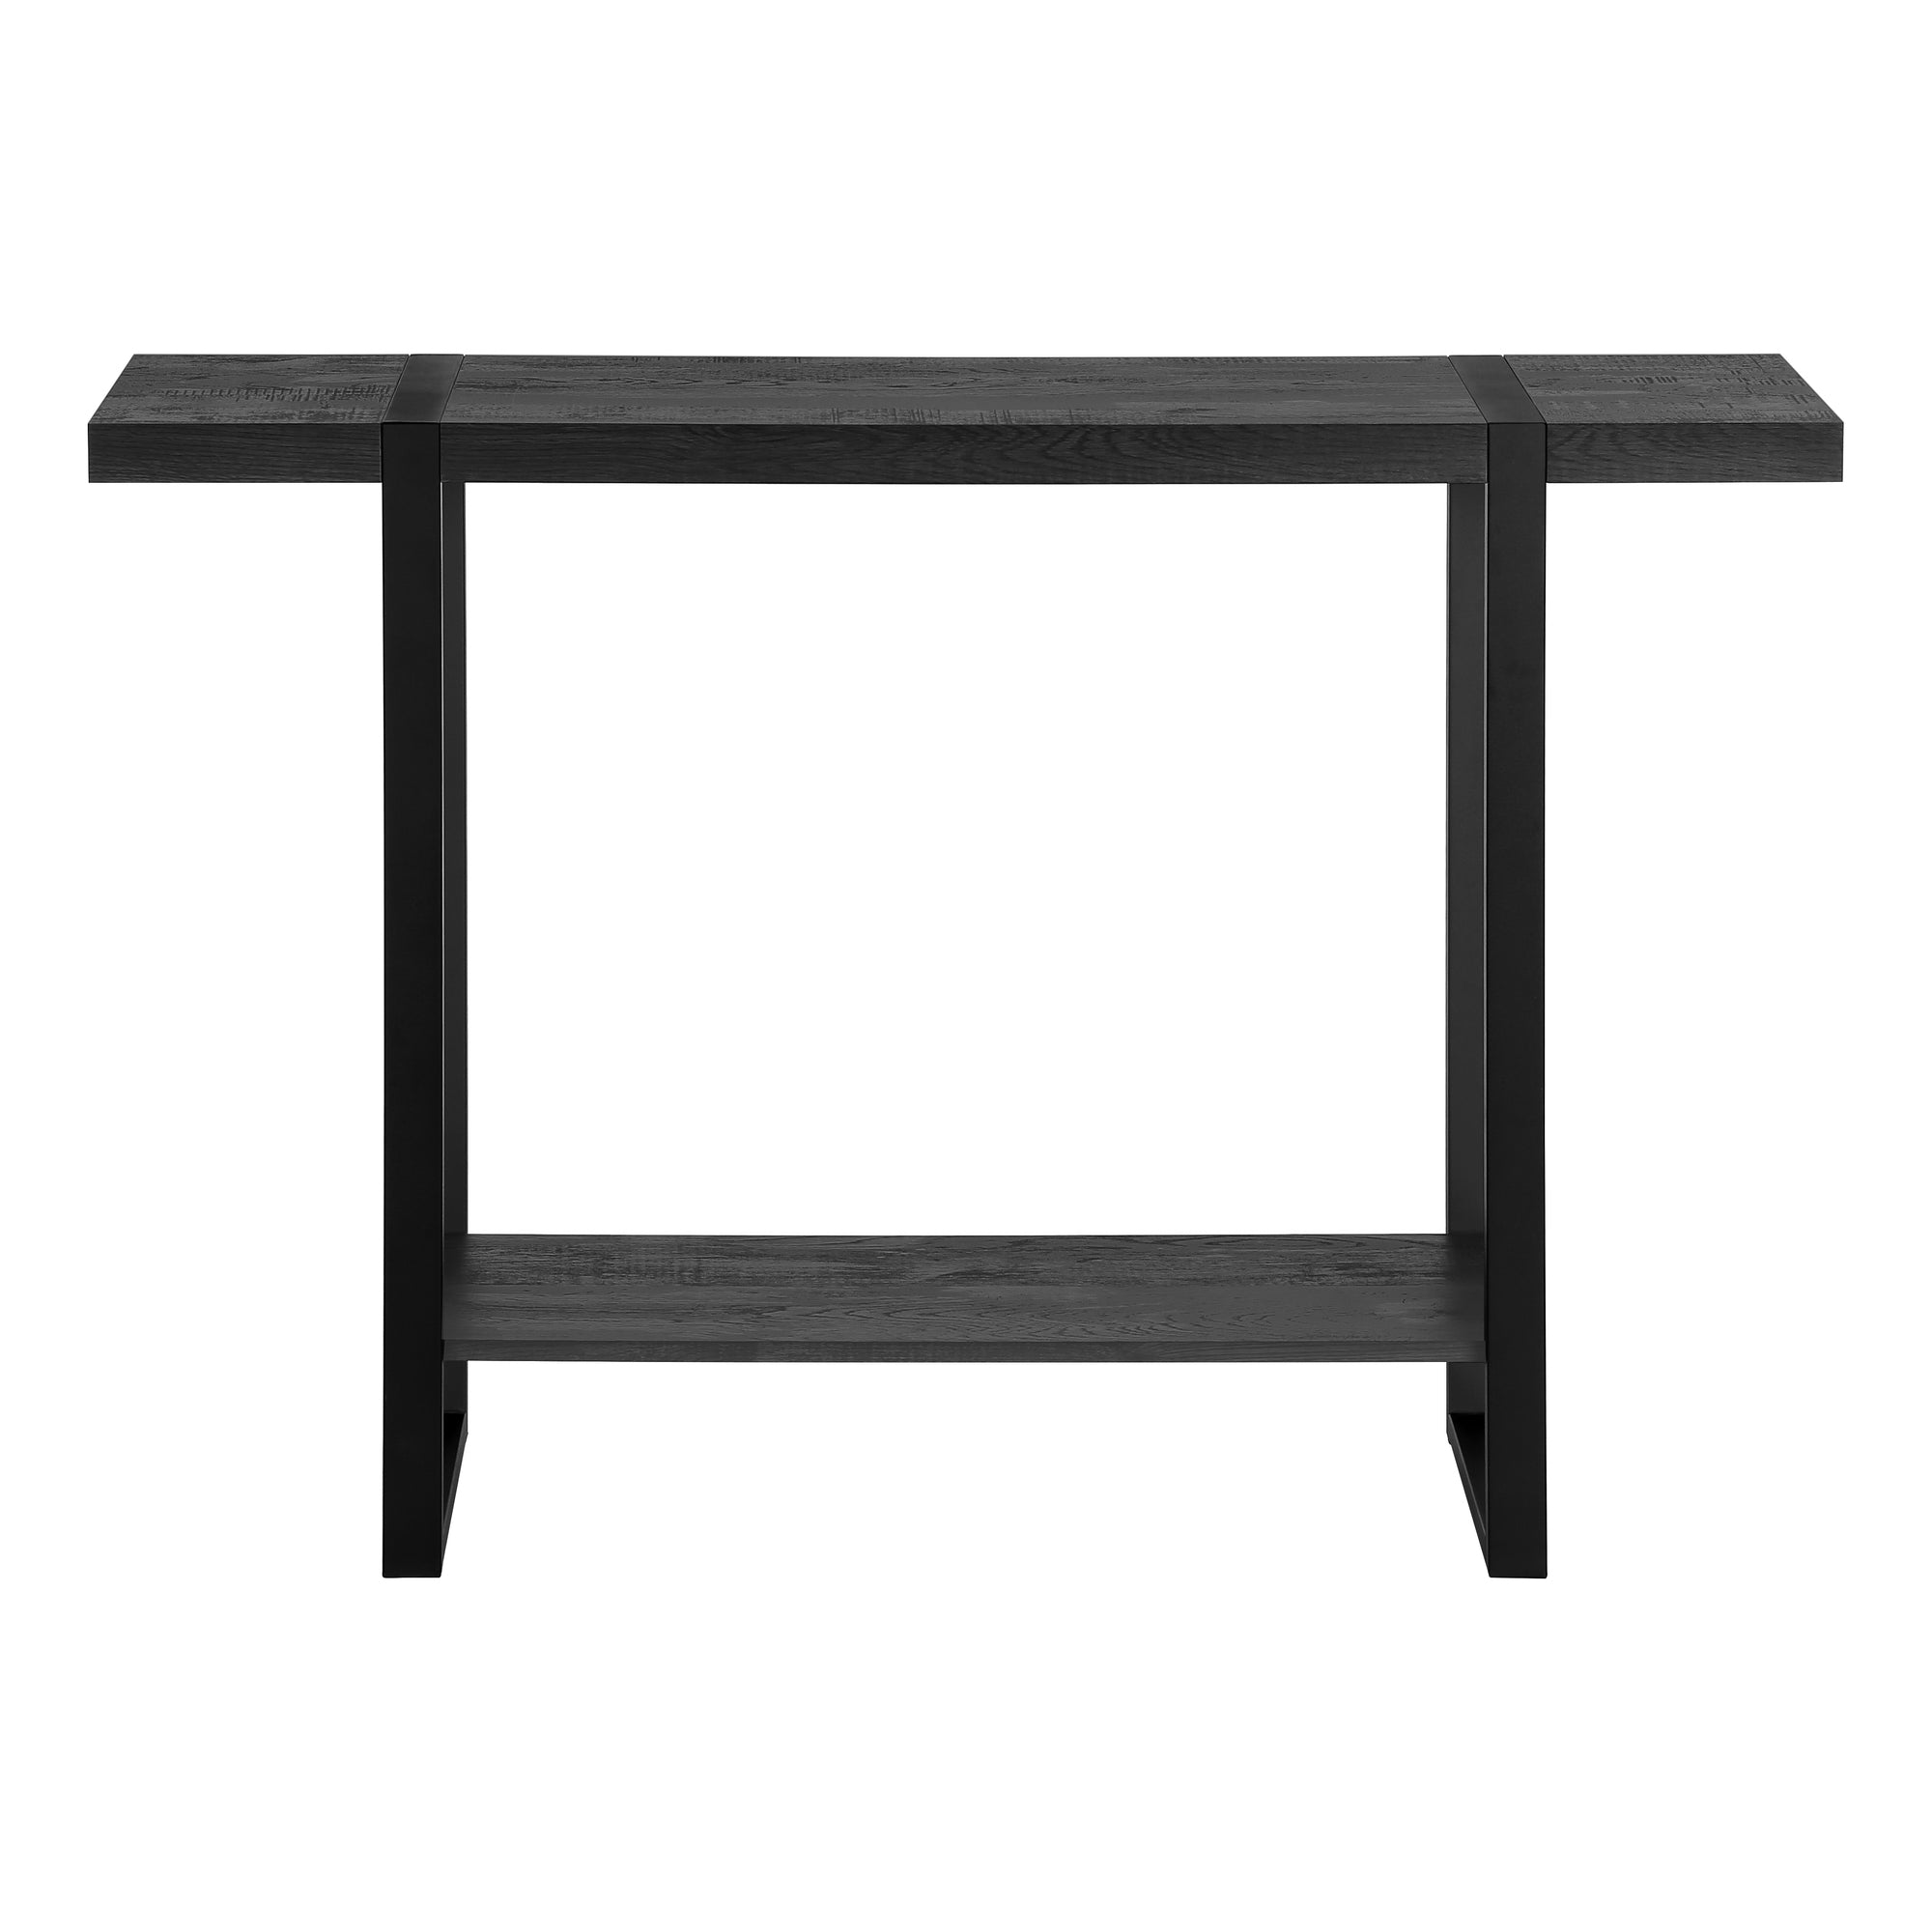 MN-642861    Accent Table, Console, Entryway, Narrow, Sofa, Living Room, Bedroom, Metal Legs, Laminate, Black Reclaimed Wood Look, Black, Contemporary, Industrial, Modern